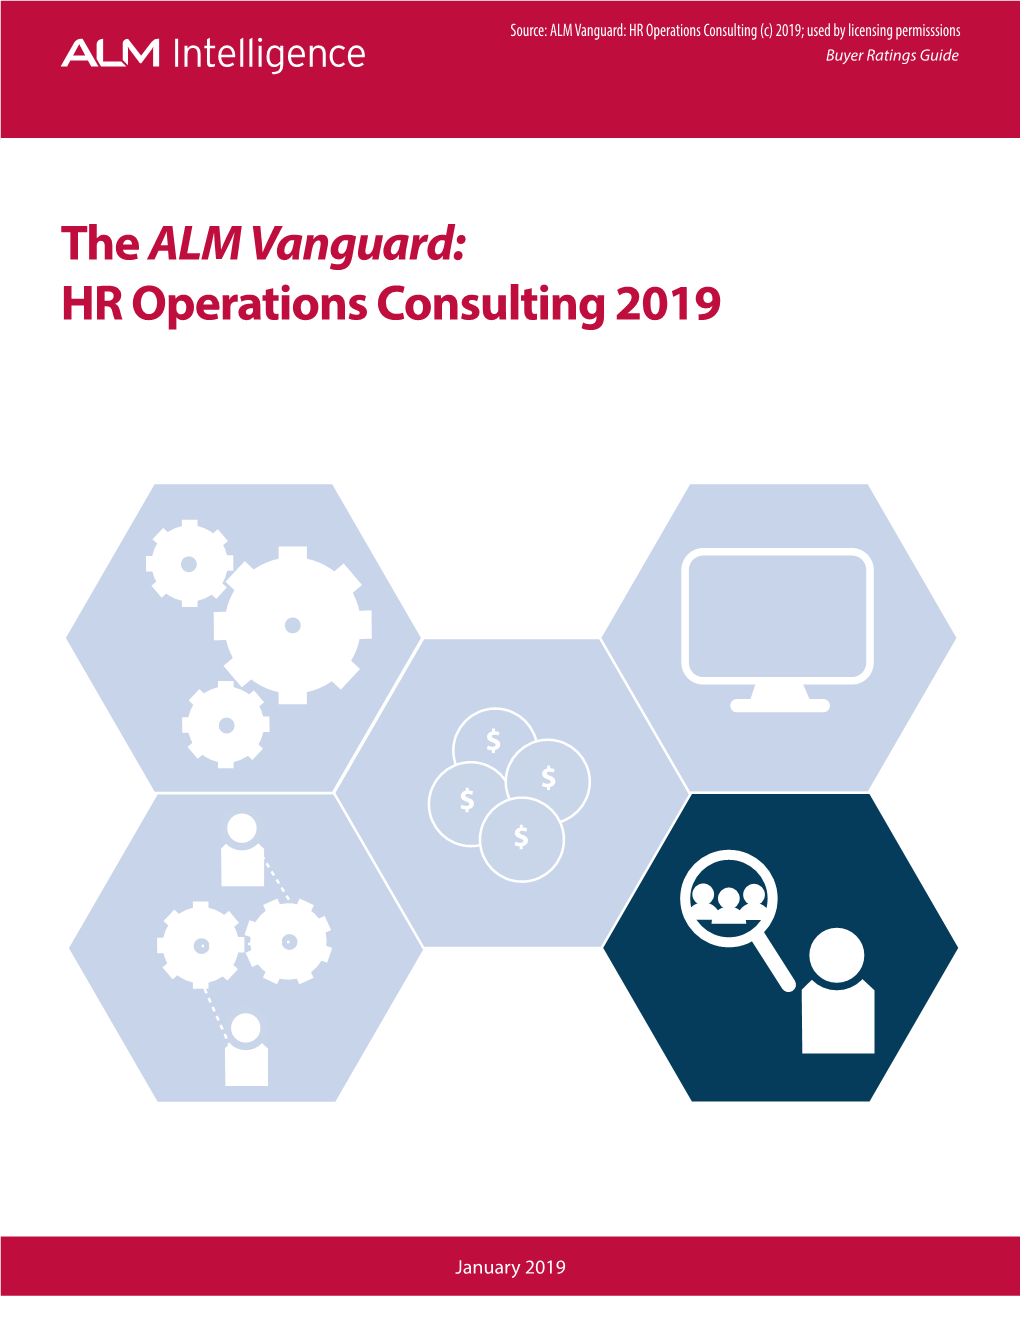 The ALM Vanguard: HR Operations Consulting 2019